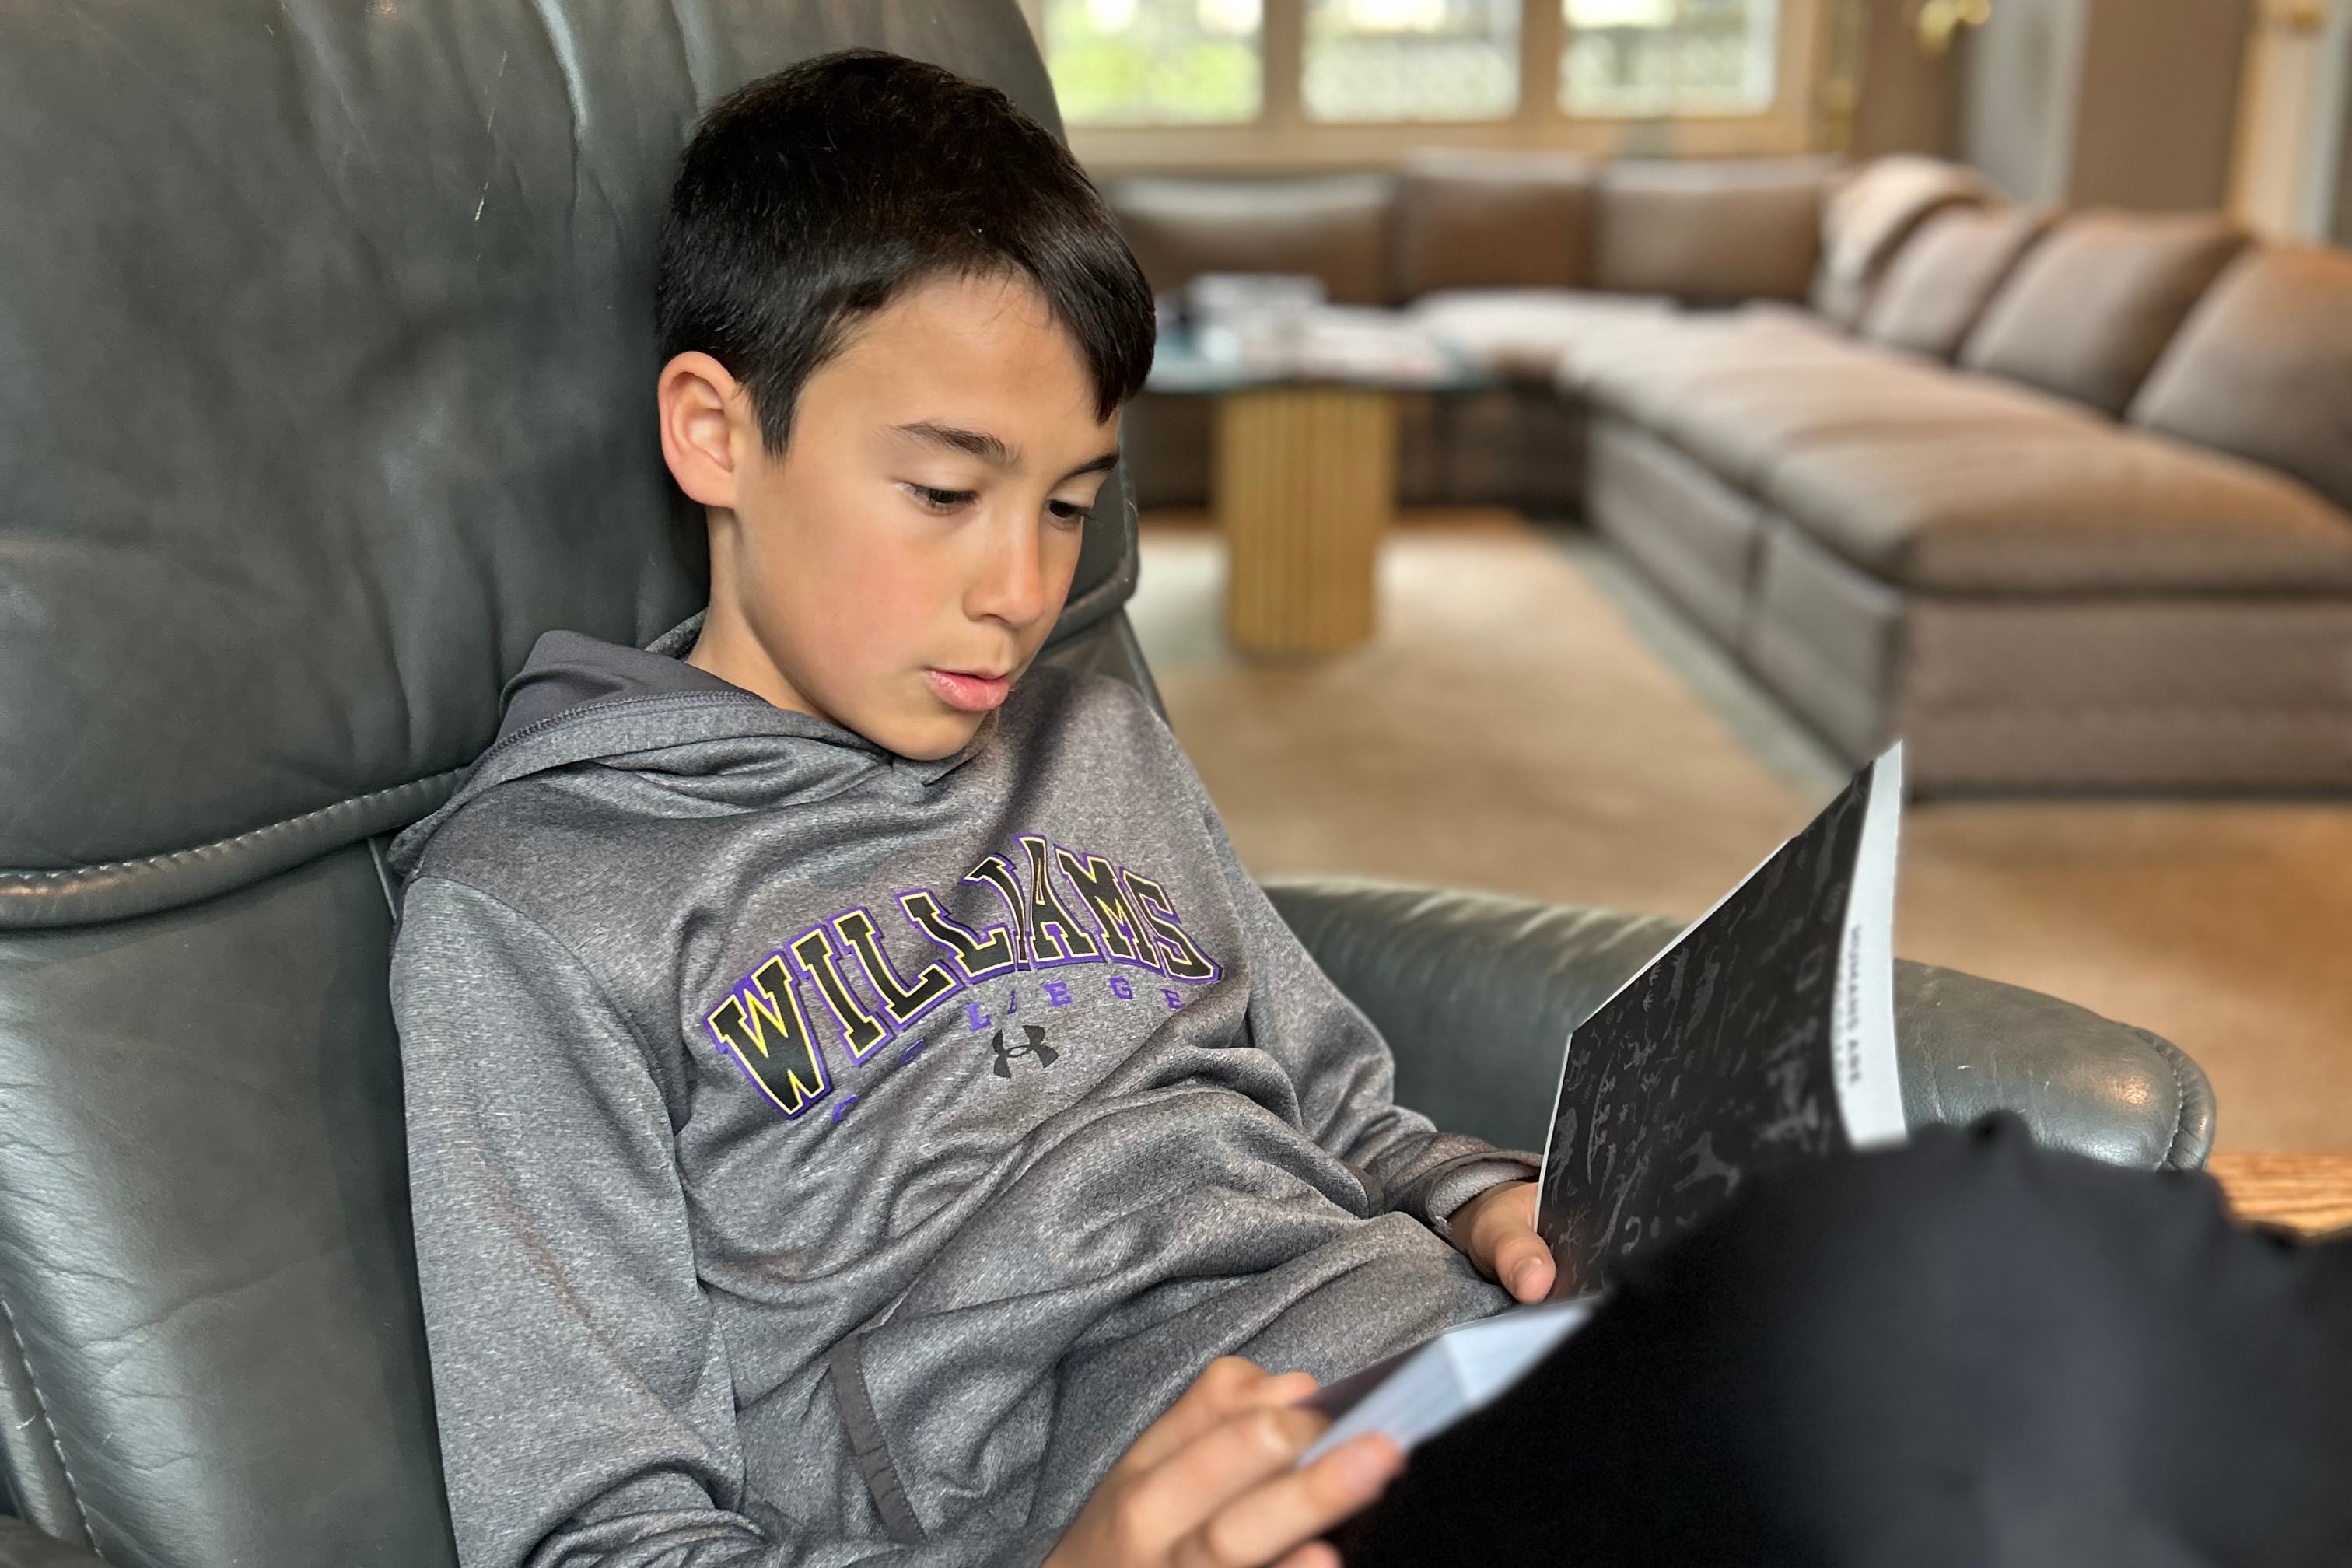 A young boy with short dark hair and wearing a grey sweater and reading a book while sitting on a chair.